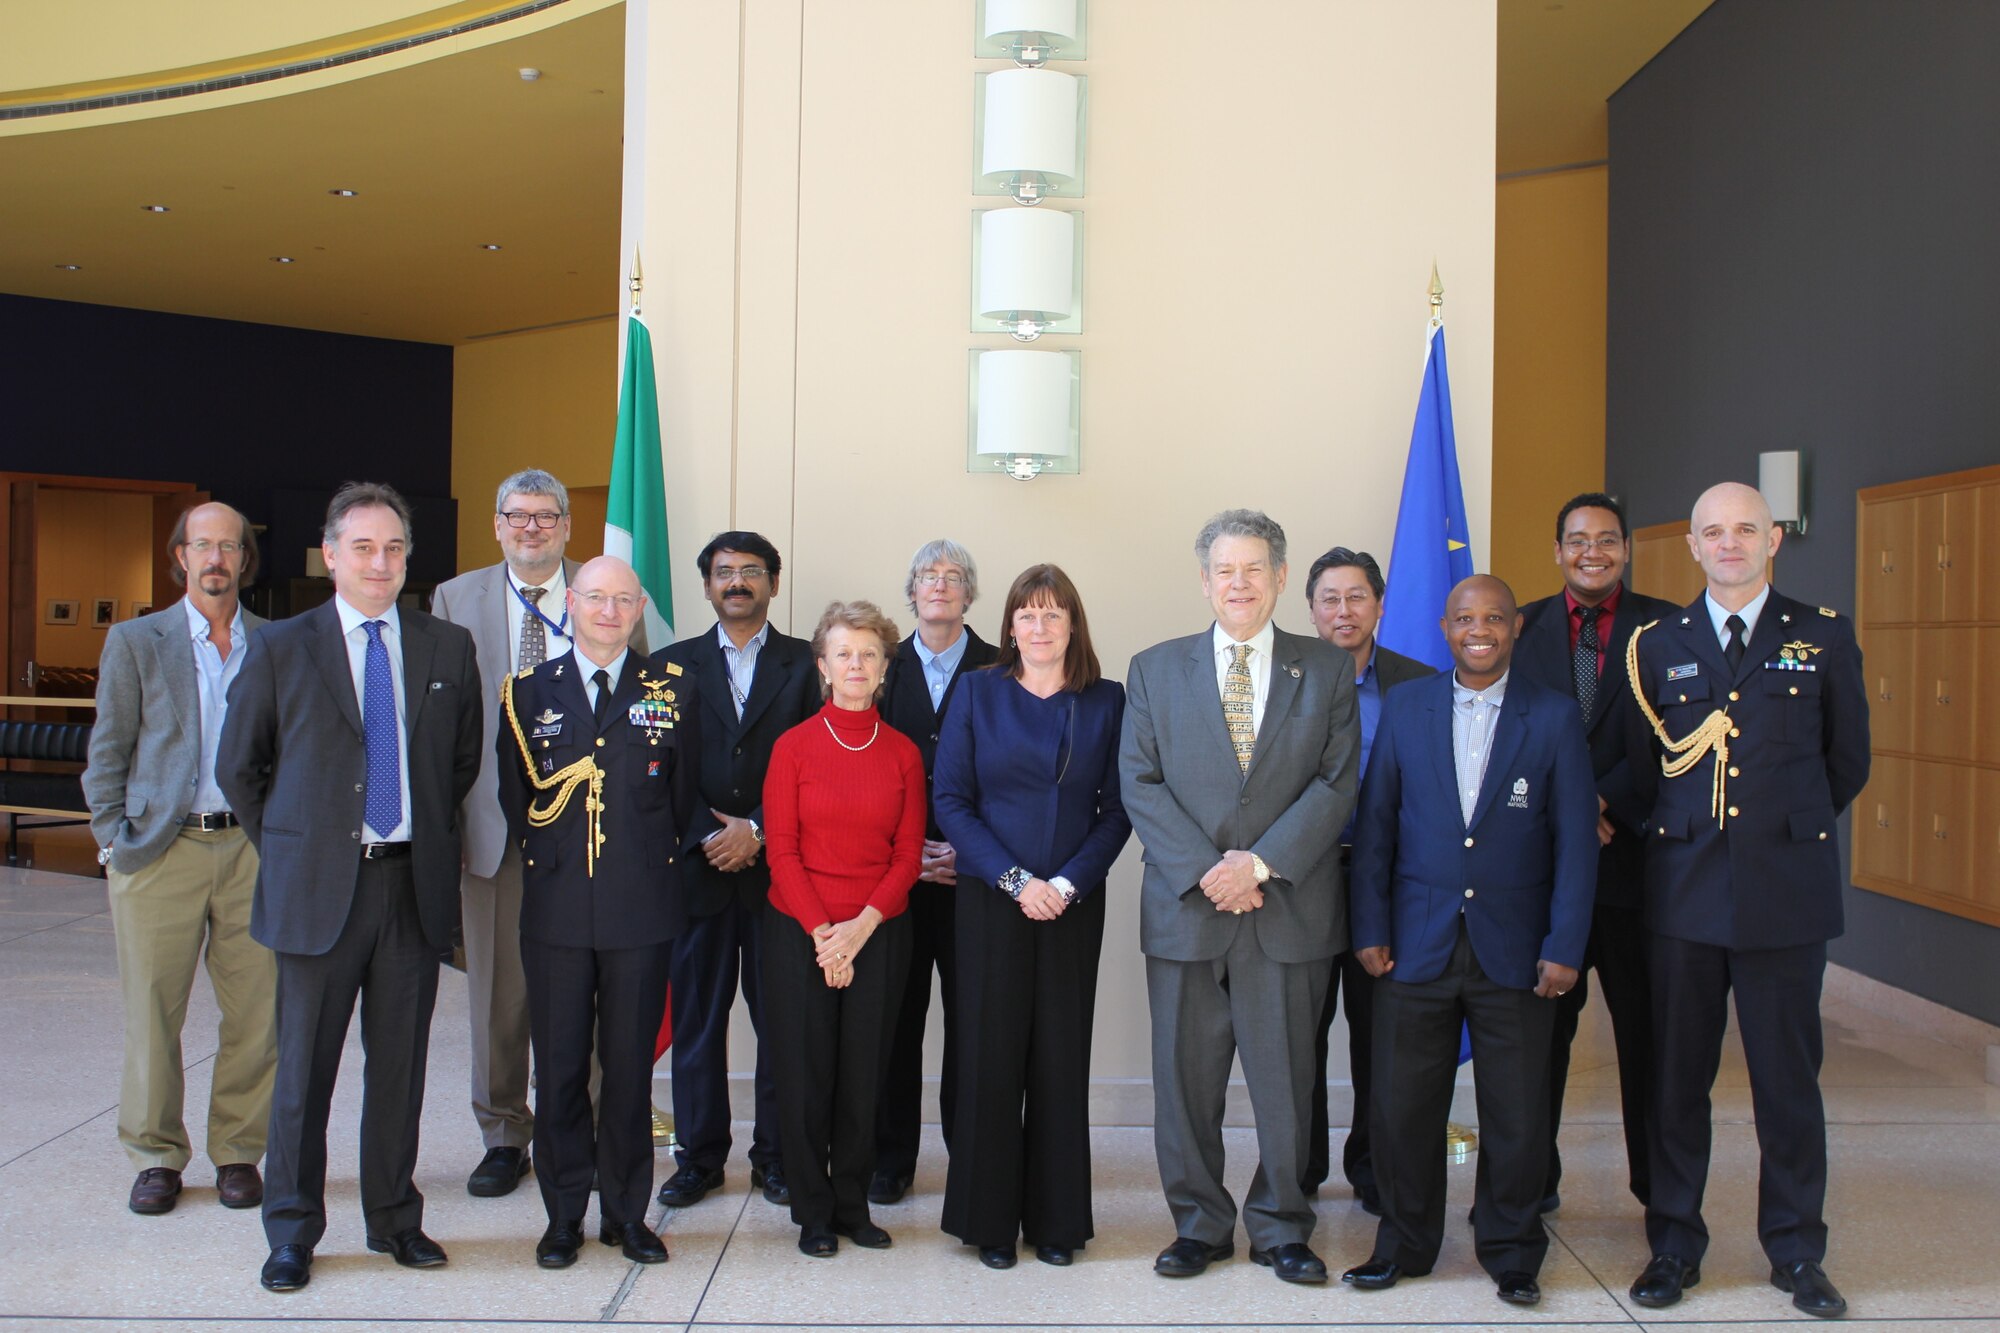 The Air Force Research Laboratory’s basic research directorate, the Air Force Office of Scientific Research (AFOSR) hosted the International Basic Research Infrastructure Meeting from Nov 12-13, 2015 at the Embassy of Italy in Washington, D.C.  This effort was made possible with the support and collaboration of the Embassy of Italy in Washington, D.C. and the National Research Council of Italy. From left to right:  Dr. Jeffery Owrutsky, Section Chief, Naval Research Laboratory, Mr. Giulio Busulini, Scientific Attaché, Embassy of Italy, Dr. Mark Maurice, ION Director, AFOSR, Maj General (AF) Luca Goretti, Defense Attaché, Embassy of Italy, Dr. Padmanabhan Seshaiyer, Program Director, National Science Foundation, Prof. Ozden Ochoa, Texas A&M University, Dr. Leanne Henry, Senior International Focal Point, AFRL/RD, Mrs. Rosie Hicks, Chief Executive Officer, Australian National Fabrication Facility, Dr. Thomas Christian, Director, AFOSR, Dr. Larry Nagahara, Associate Dean of Research, Johns Hopkins University, Dr. Makhapa Makhafola, General Manager for Research and Development, MINTEK National Science Council, Dr. Sofi Bin-Salamon, International Program Manager, AFOSR, Lt Col (AF) Alessio Grasso, Assistant Defense Attaché, Embassy of Italy.